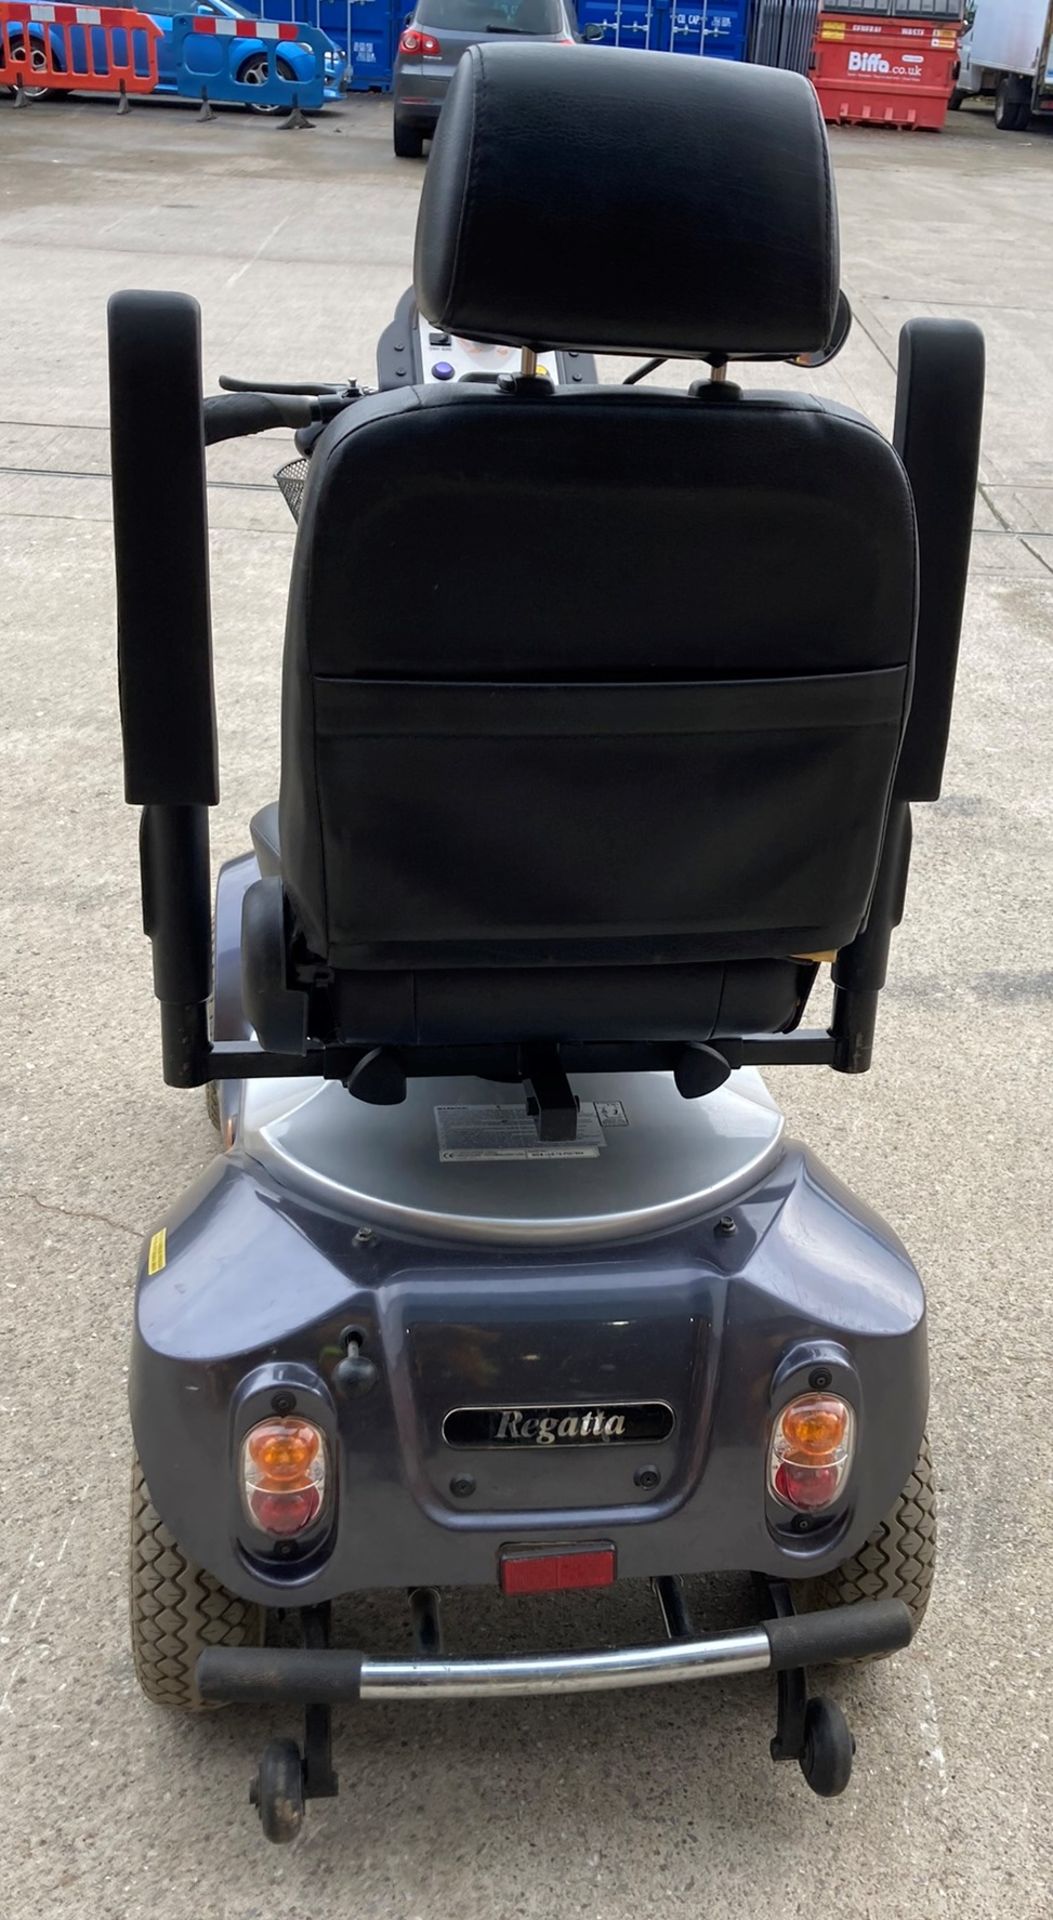 MERCURY REGATTA FOUR WHEEL MOBILITY SCOOTER - Electric - Grey. - Image 4 of 9